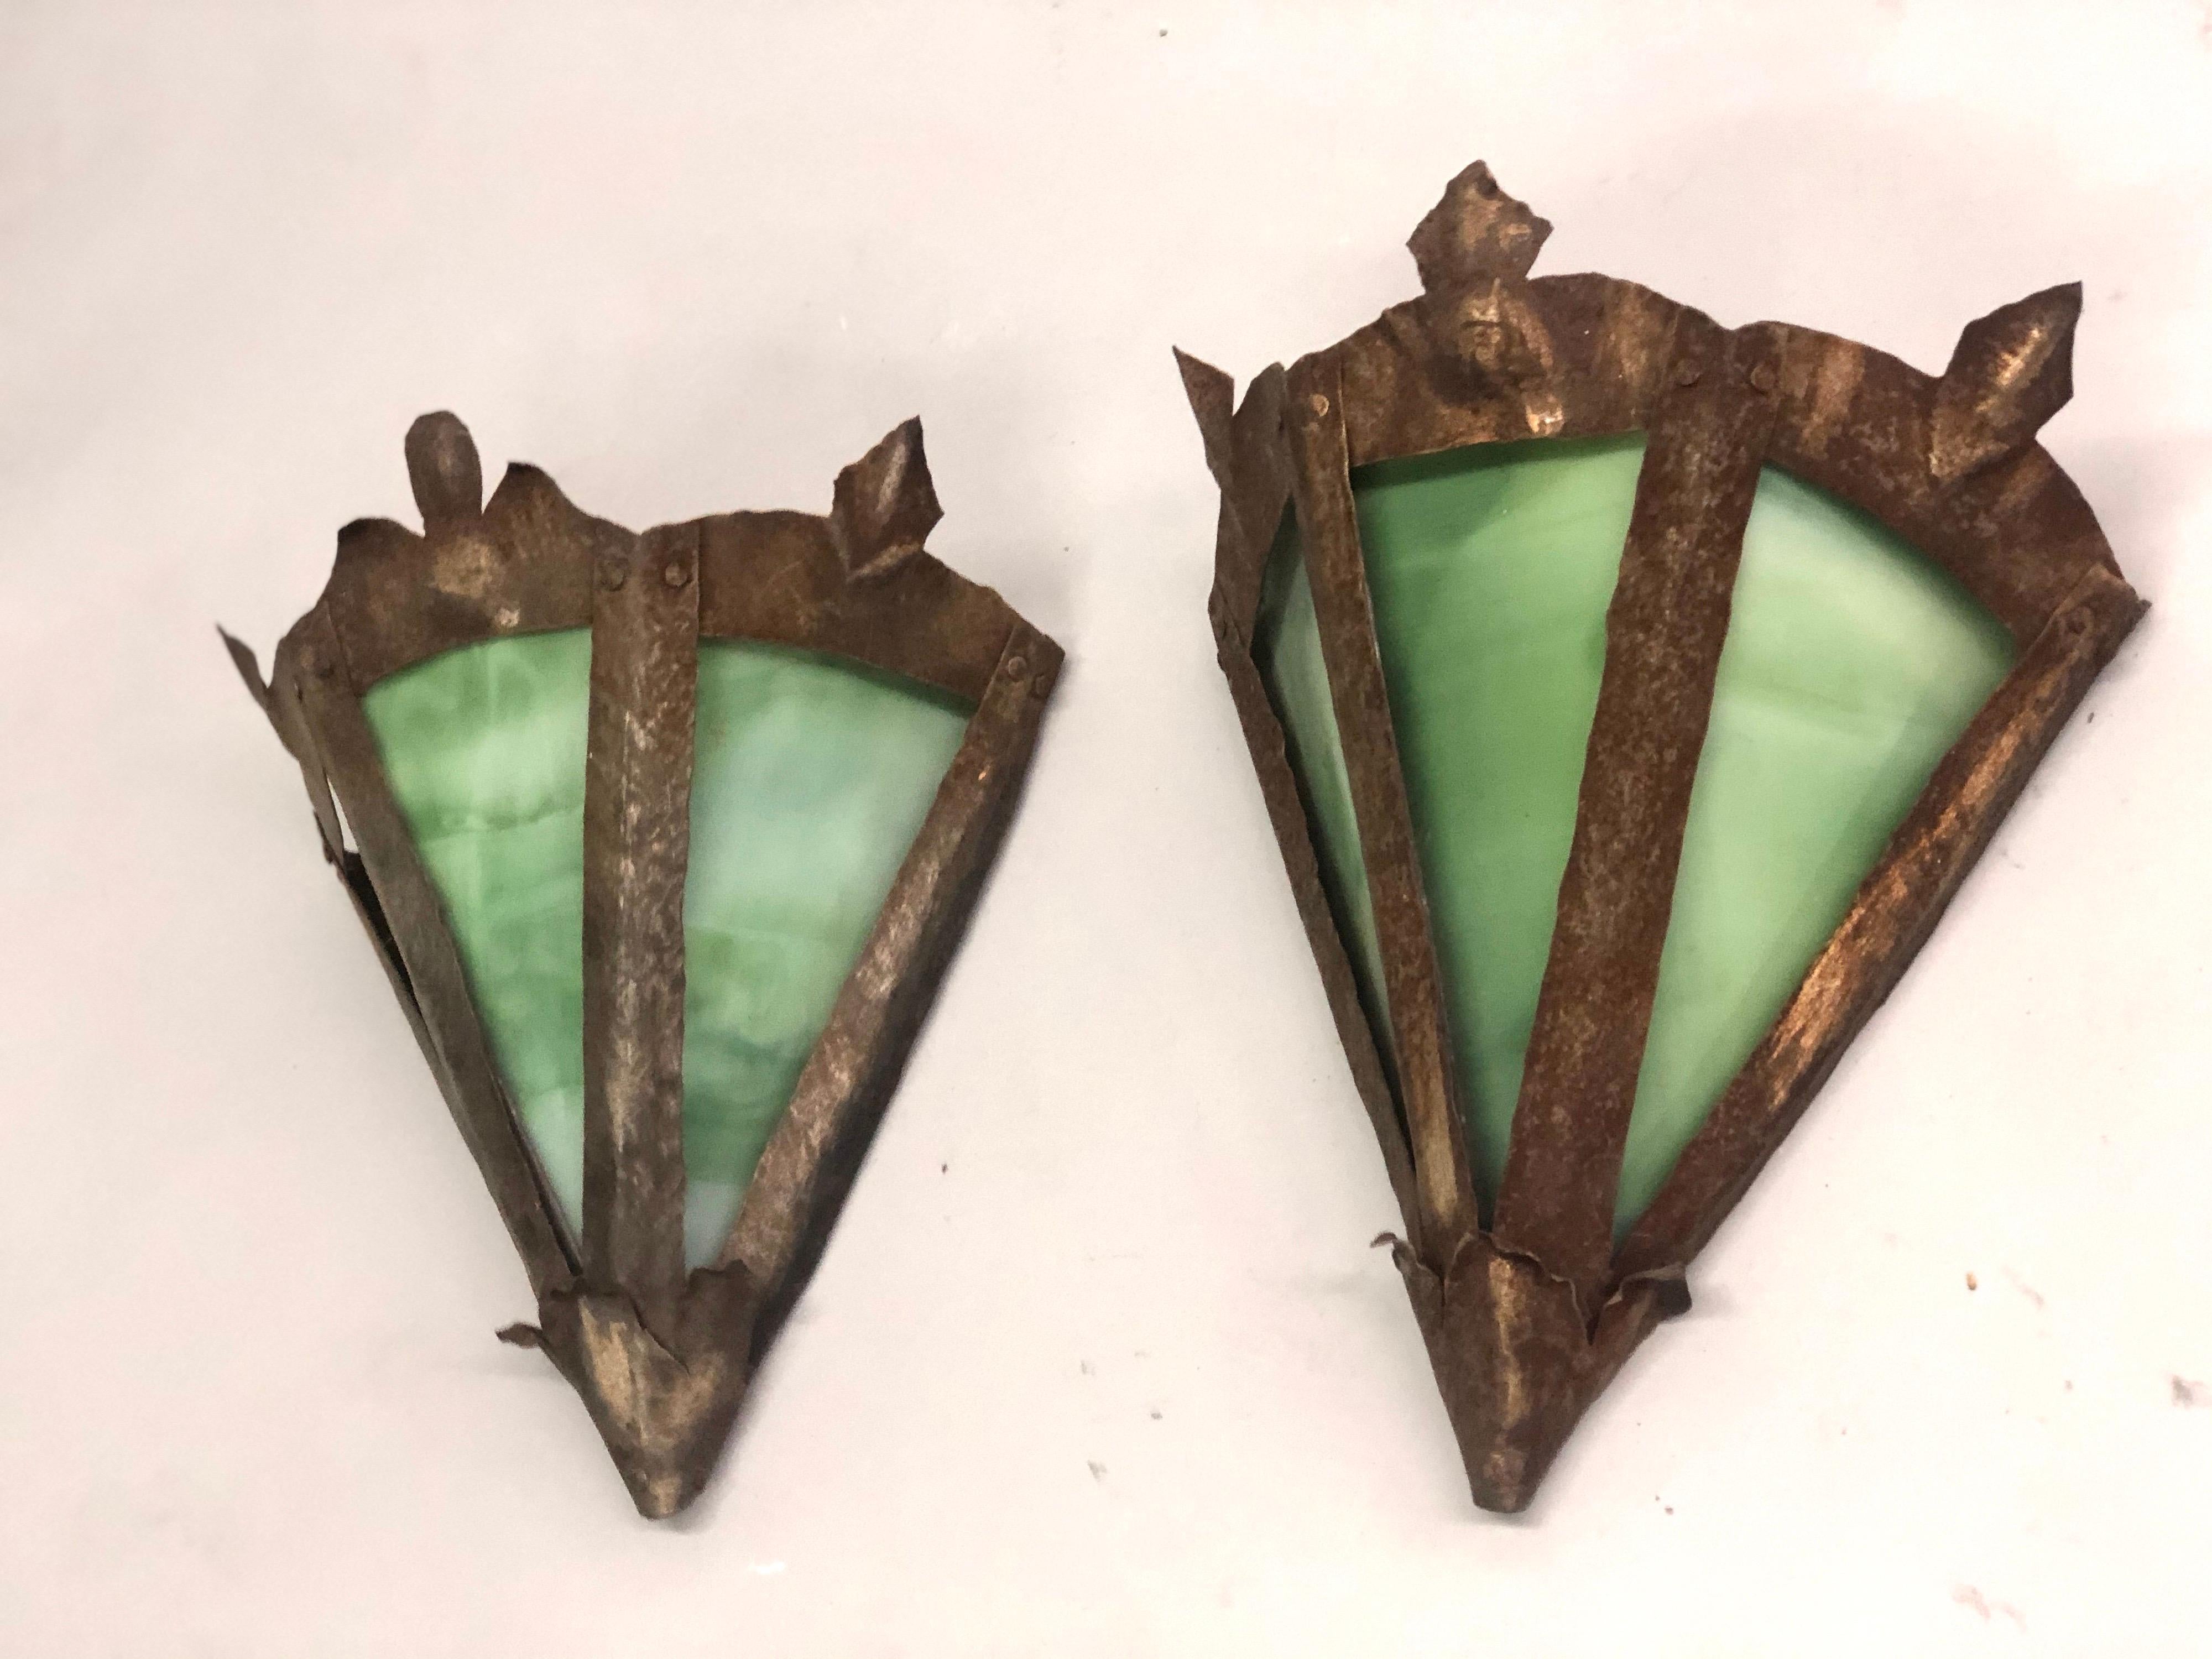 A pair of French early 20th century handmade rustic leaded glass wall lights with three opaque green glass panels set in a tin frame.